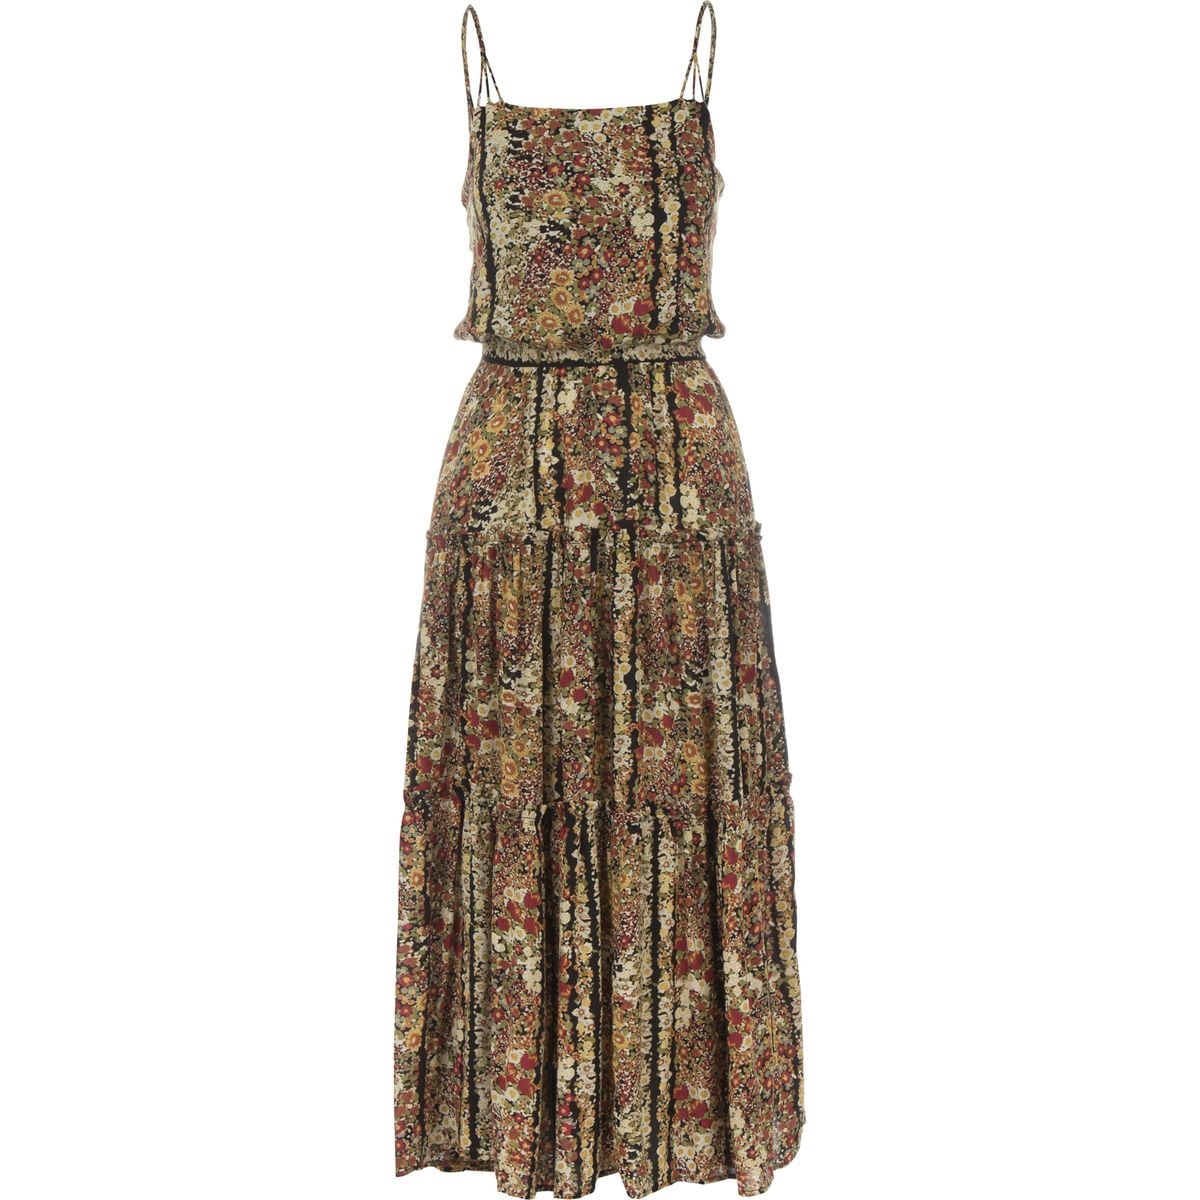 Free People Valerie Printed Maxi Dress - Women's - Clothing